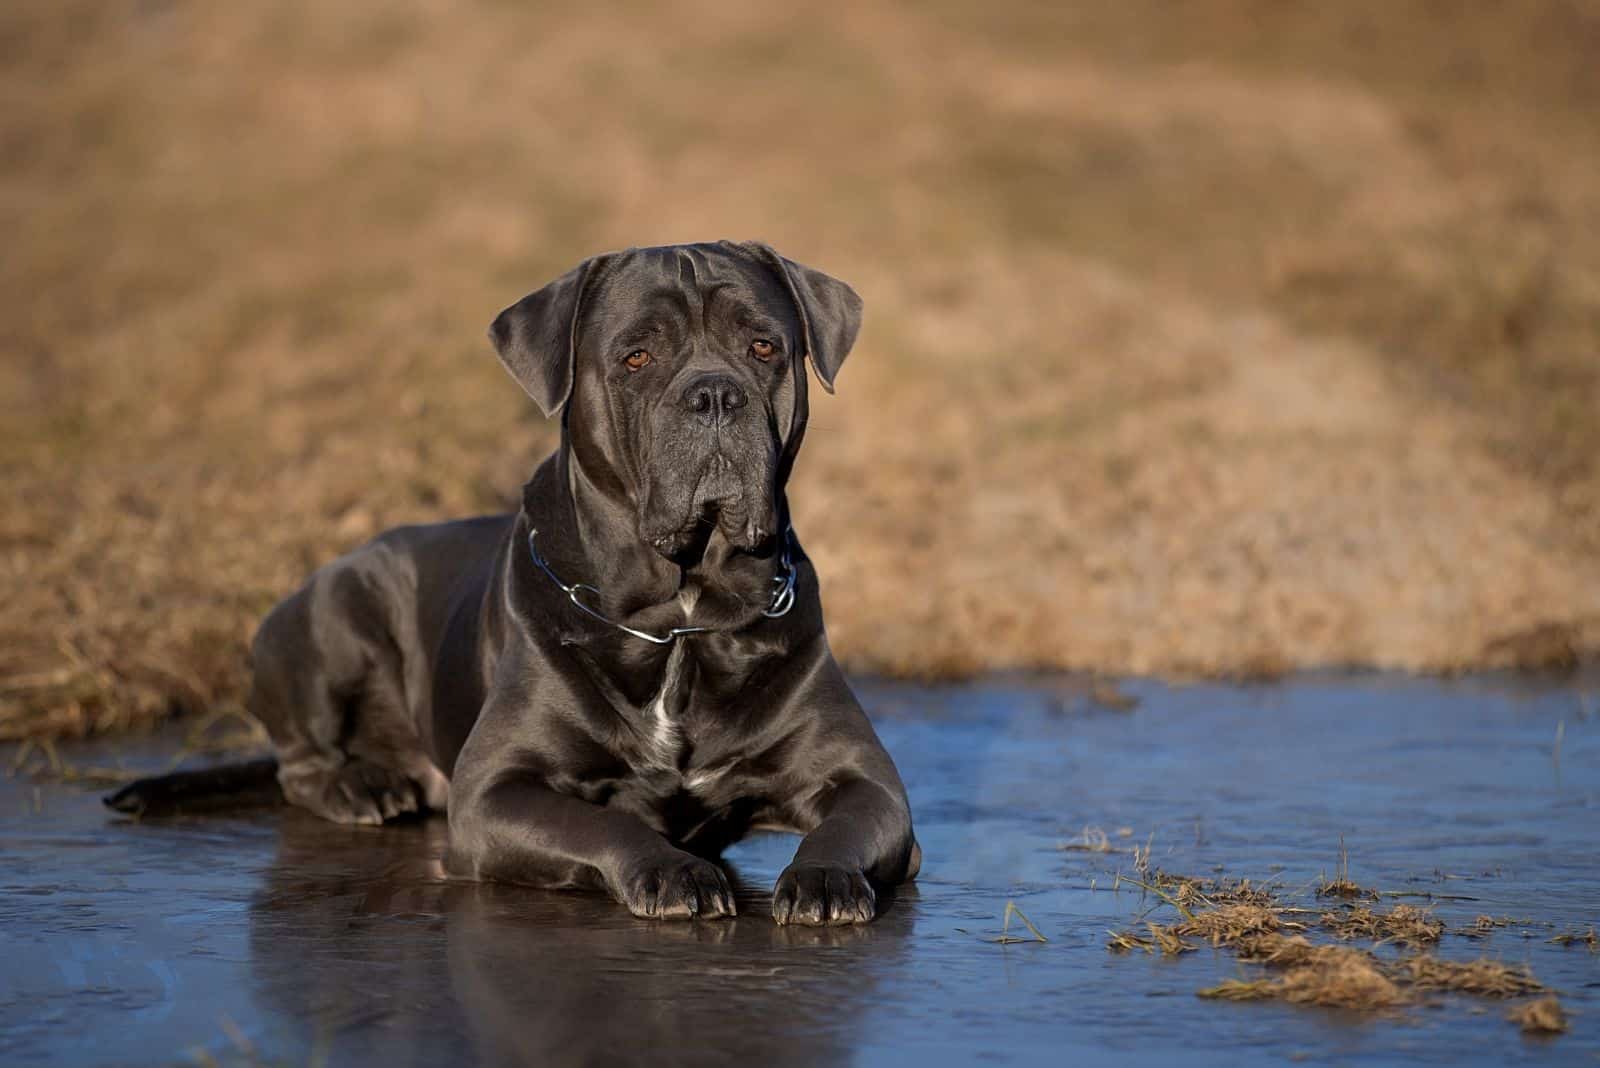 The Cane Corso Lifespan: How Long Will Your Dog Be Around